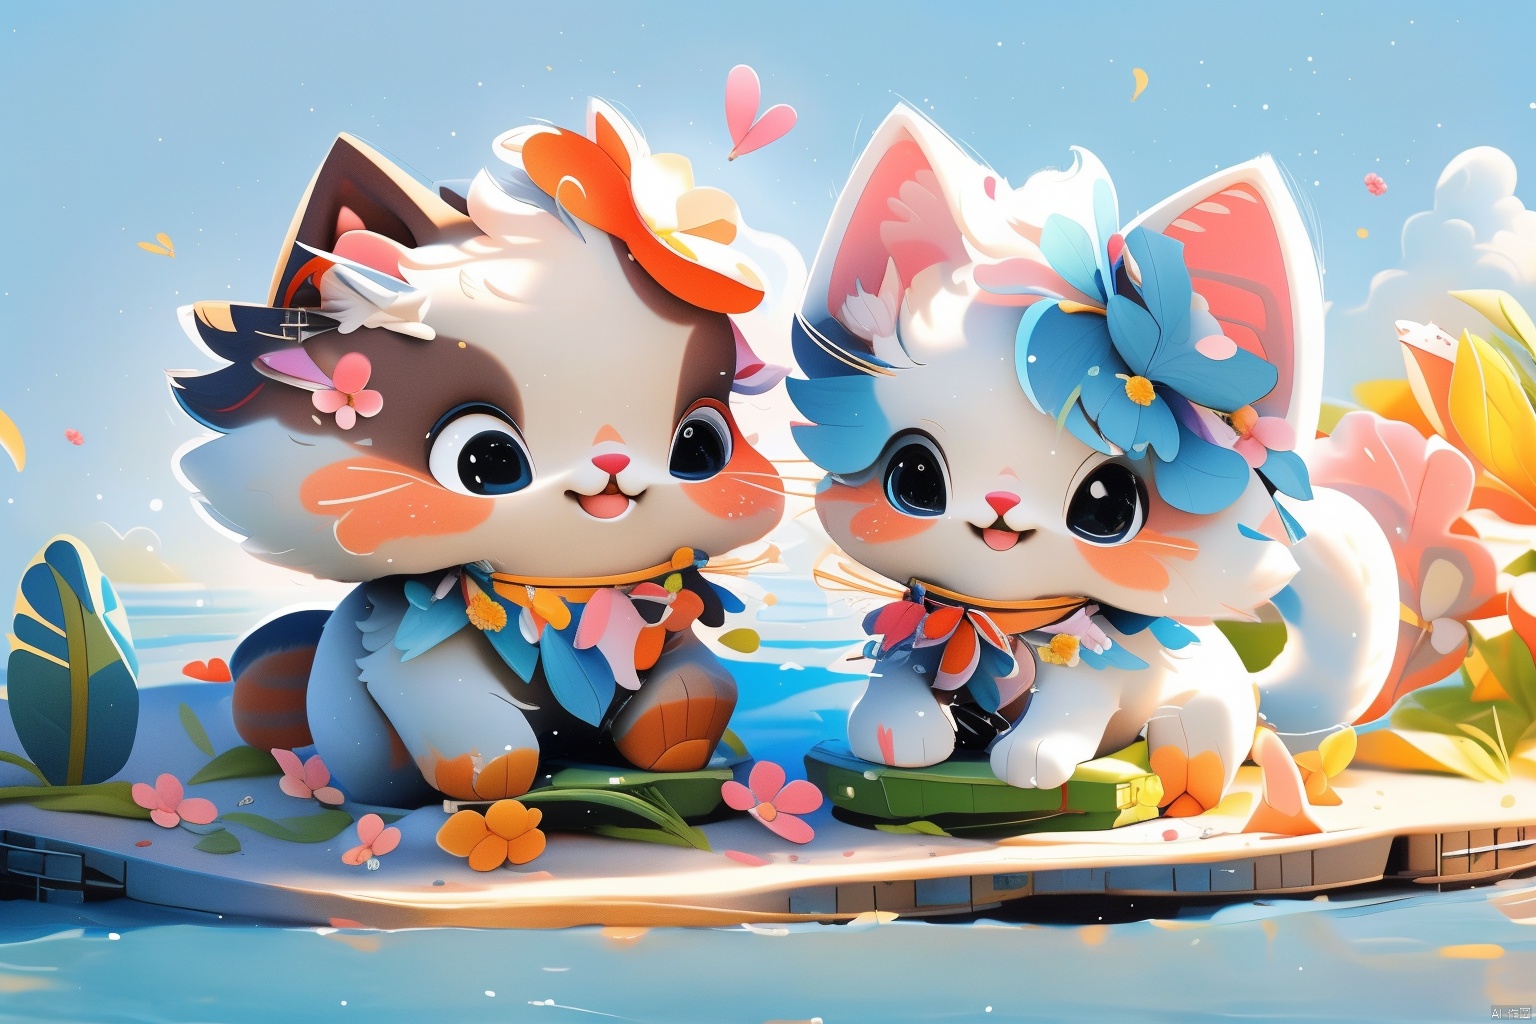  sunny,To play by the sea,
Bathing on the beach,
Camping, picnicking, feeling the wind.In Hainan, 
At this time mood at this time day, nothing little fairy., light master, （maomika：1.2）,(1cat:1.3),Lie on one's stomach, maomika, cat, Hanamawine, three views,cure, chibi, MG xiongmao, Dog_Teddy,